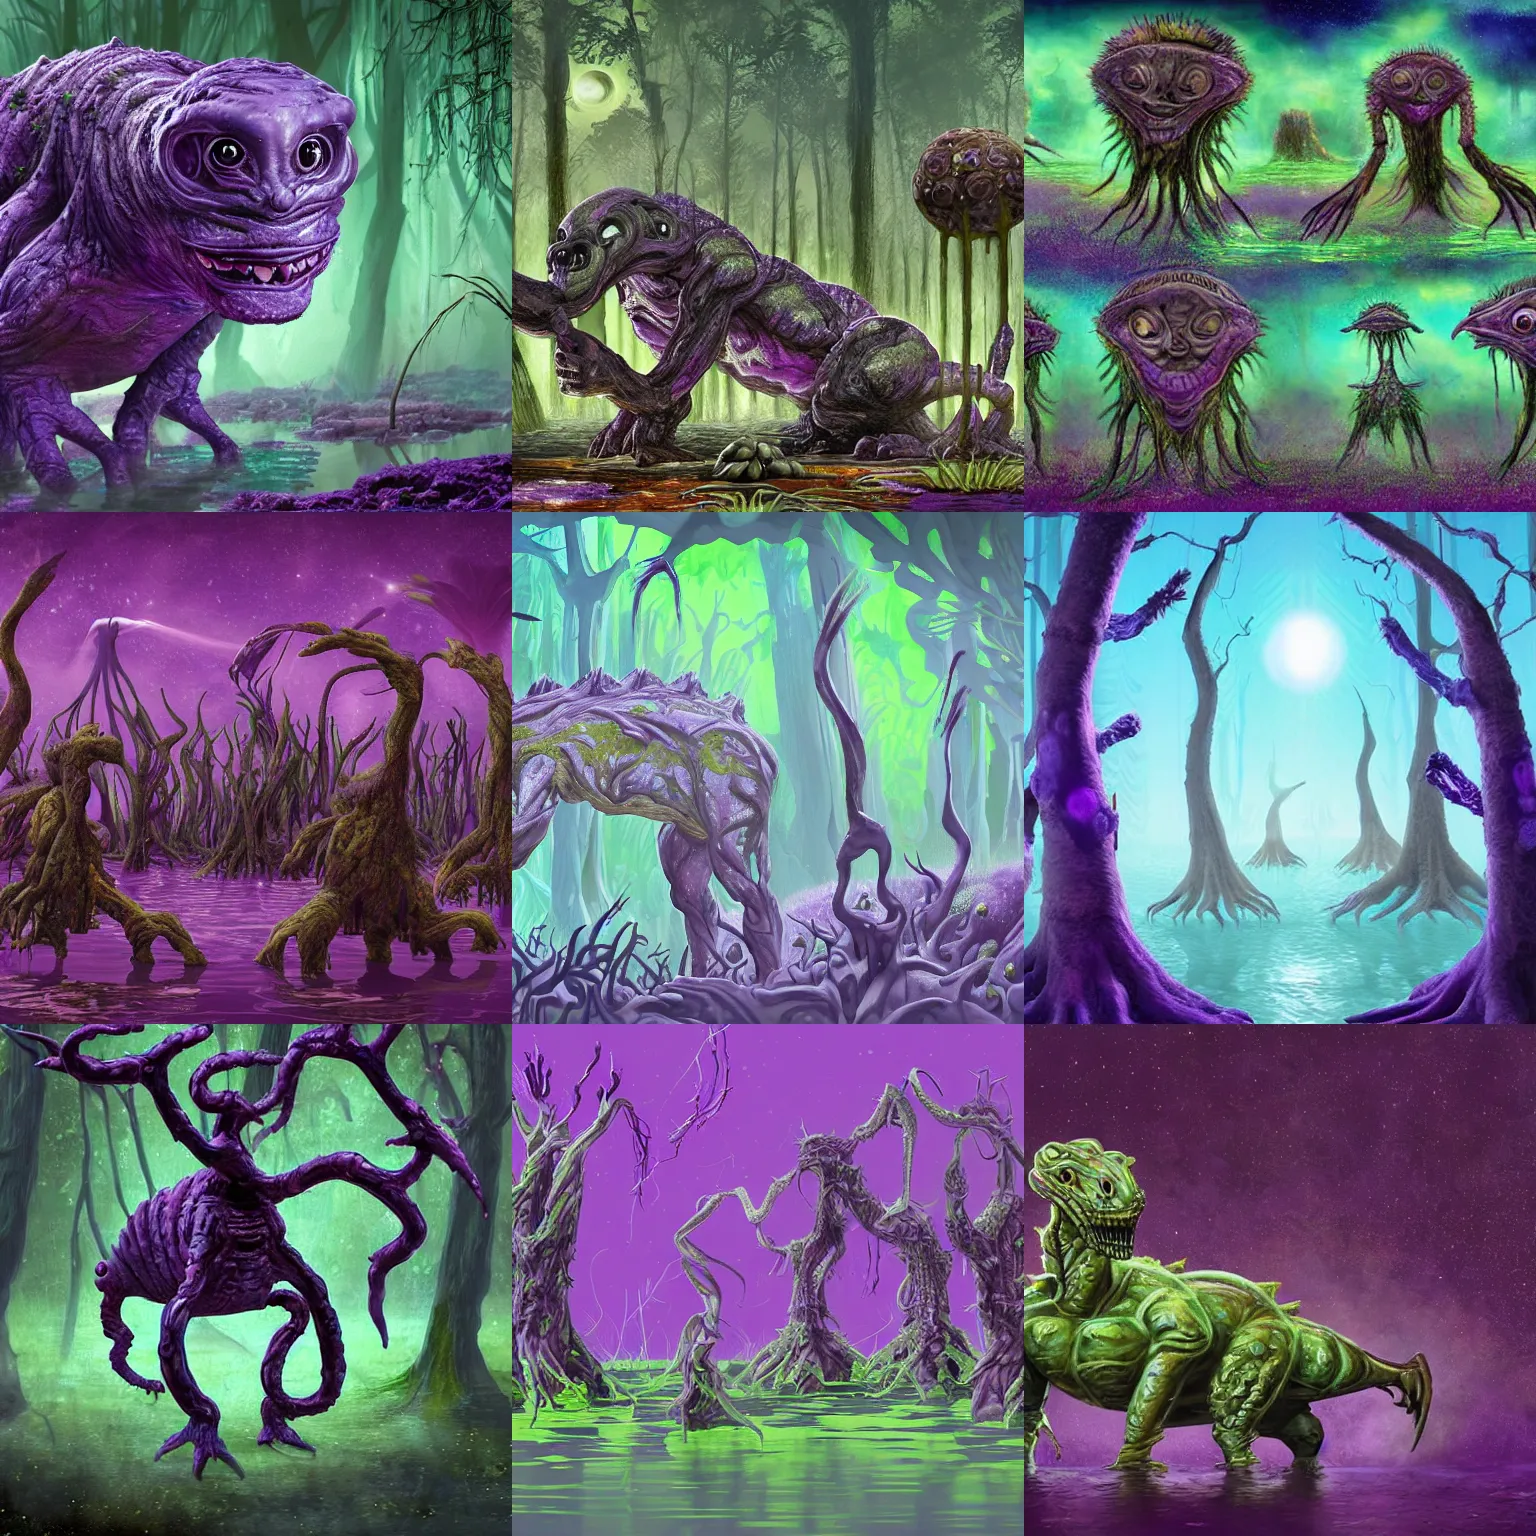 Prompt: extraterrestrial creature animal like adapted to swamps made of fertile purple mud and bulbous trees biomes, speculative evolution exobiology astrobiology, sci - fi illustration realistic naturalistic art